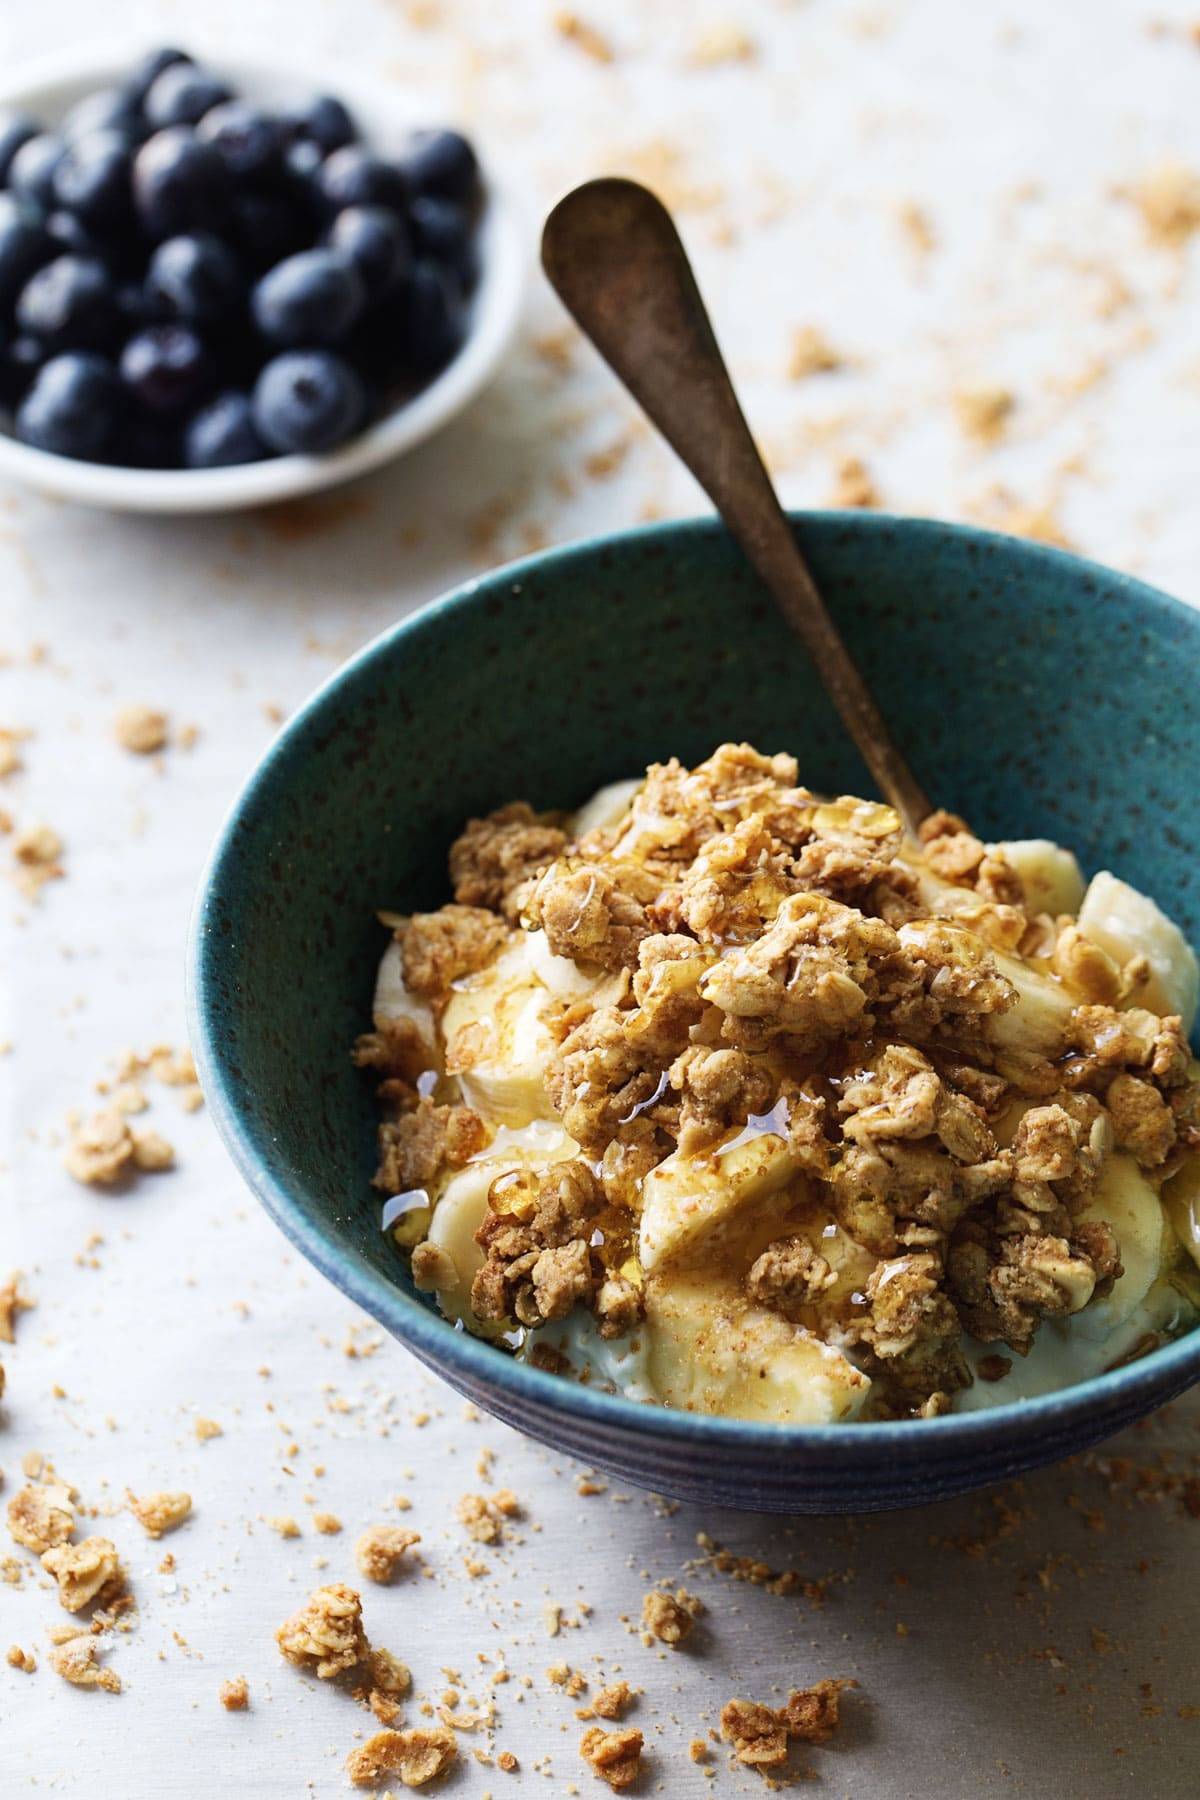 Granola on top of bananas in a blue bowl.